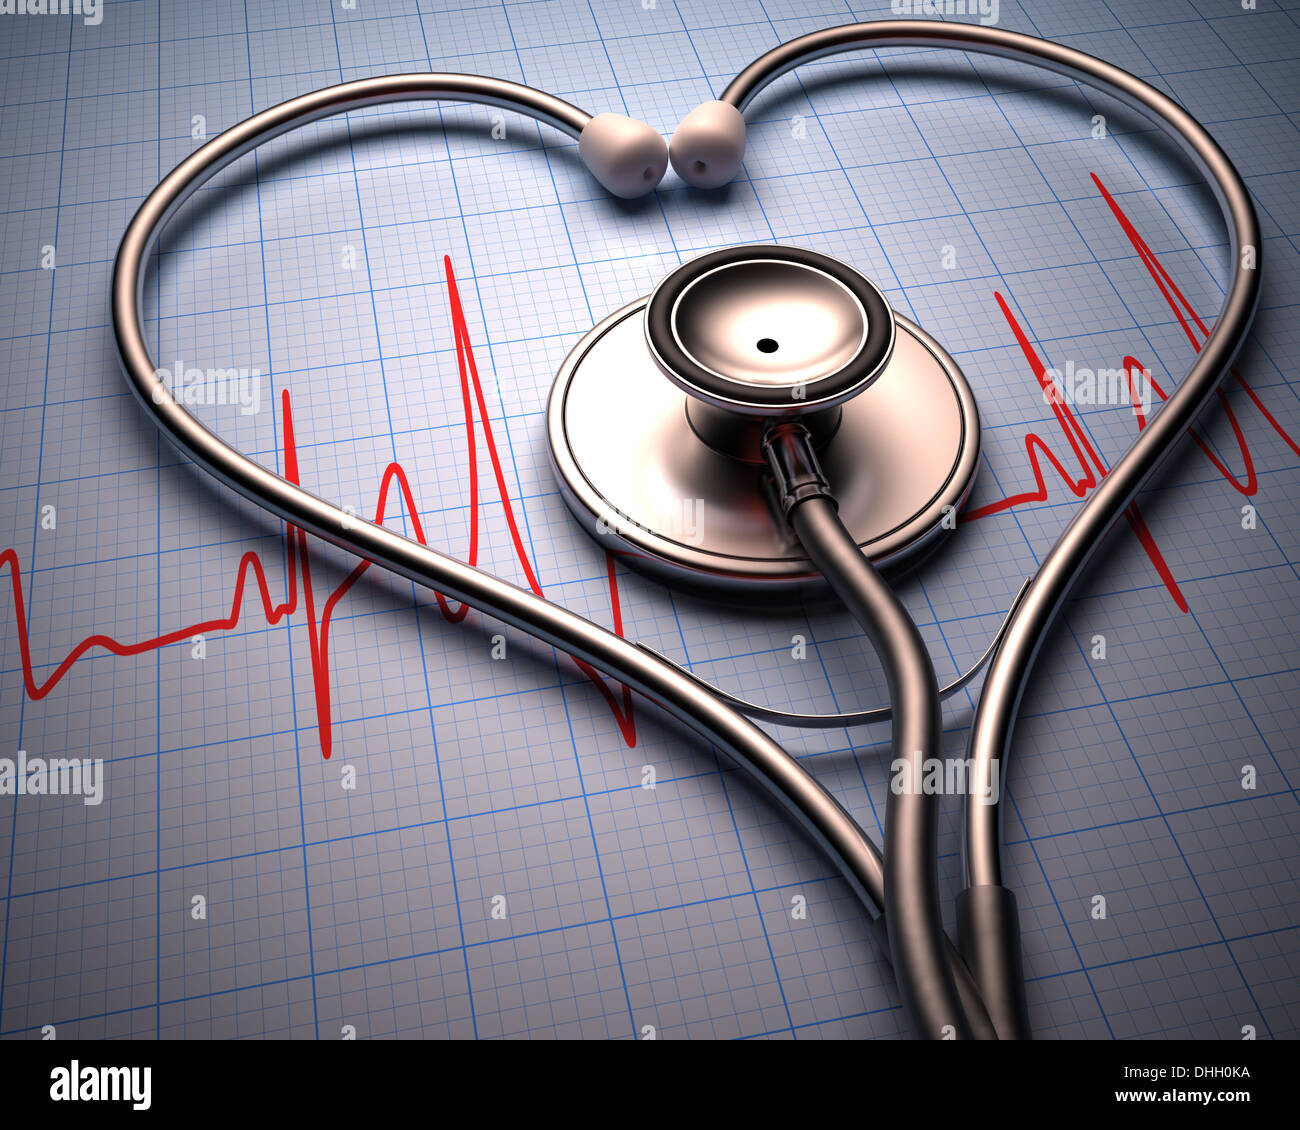 Stethoscope in shape of heart on a graph of the patient's heartbeat. Stock Photo